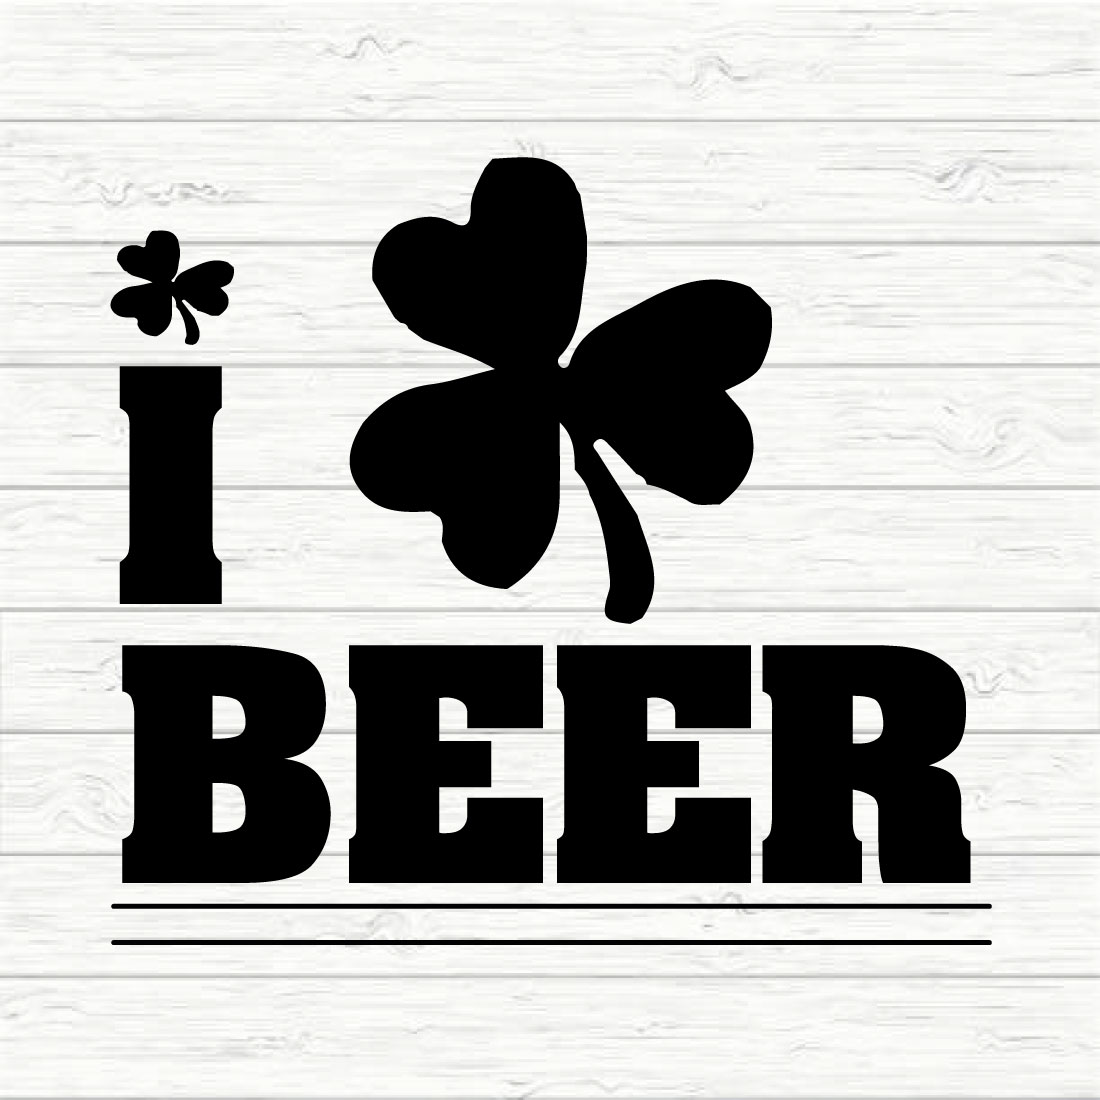 I Love Beer preview image.